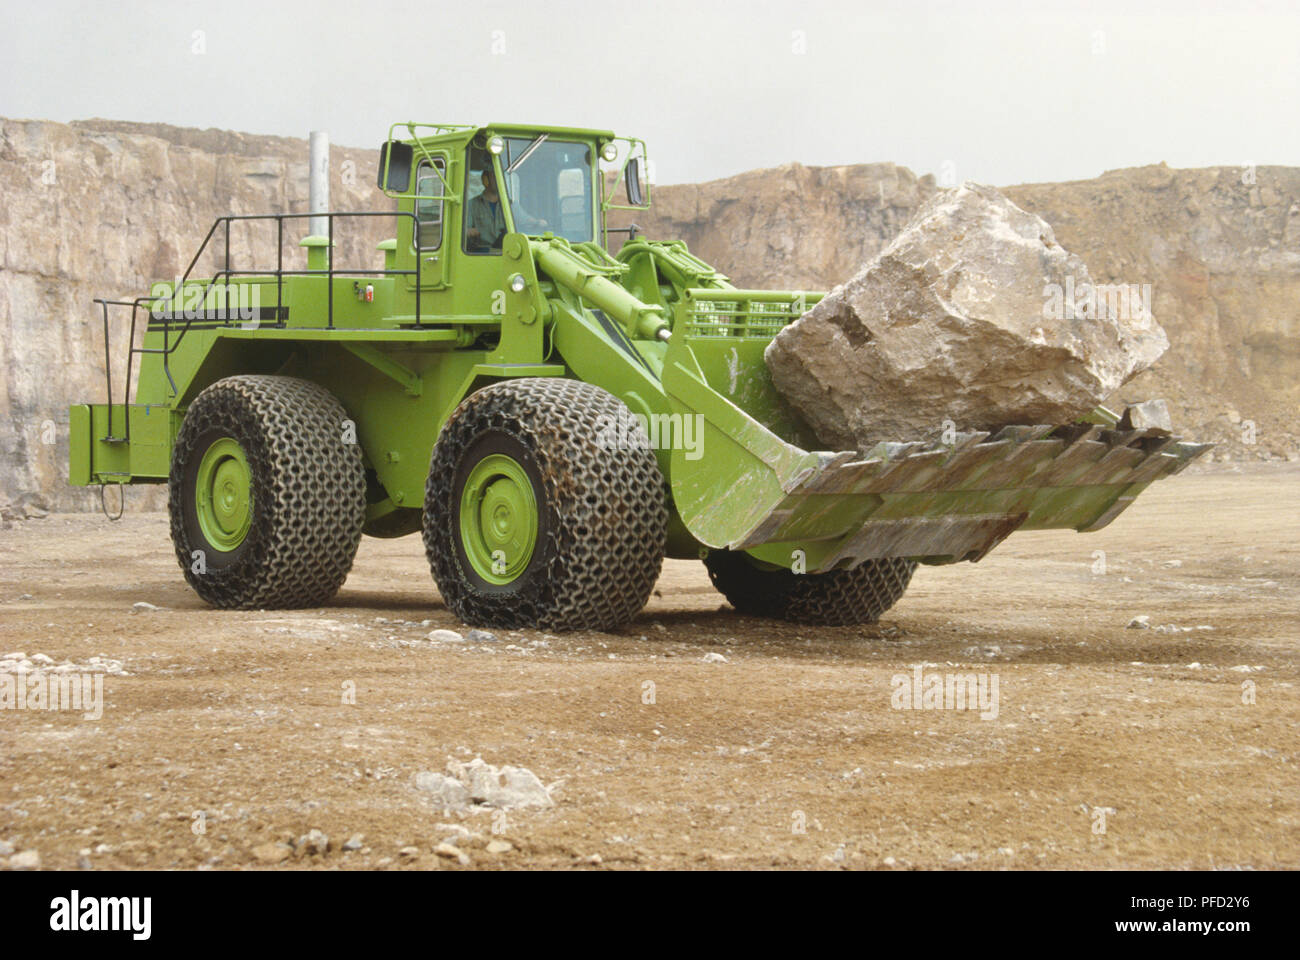 Large green loader with blade at the front carrying a heavy rock. Stock Photo